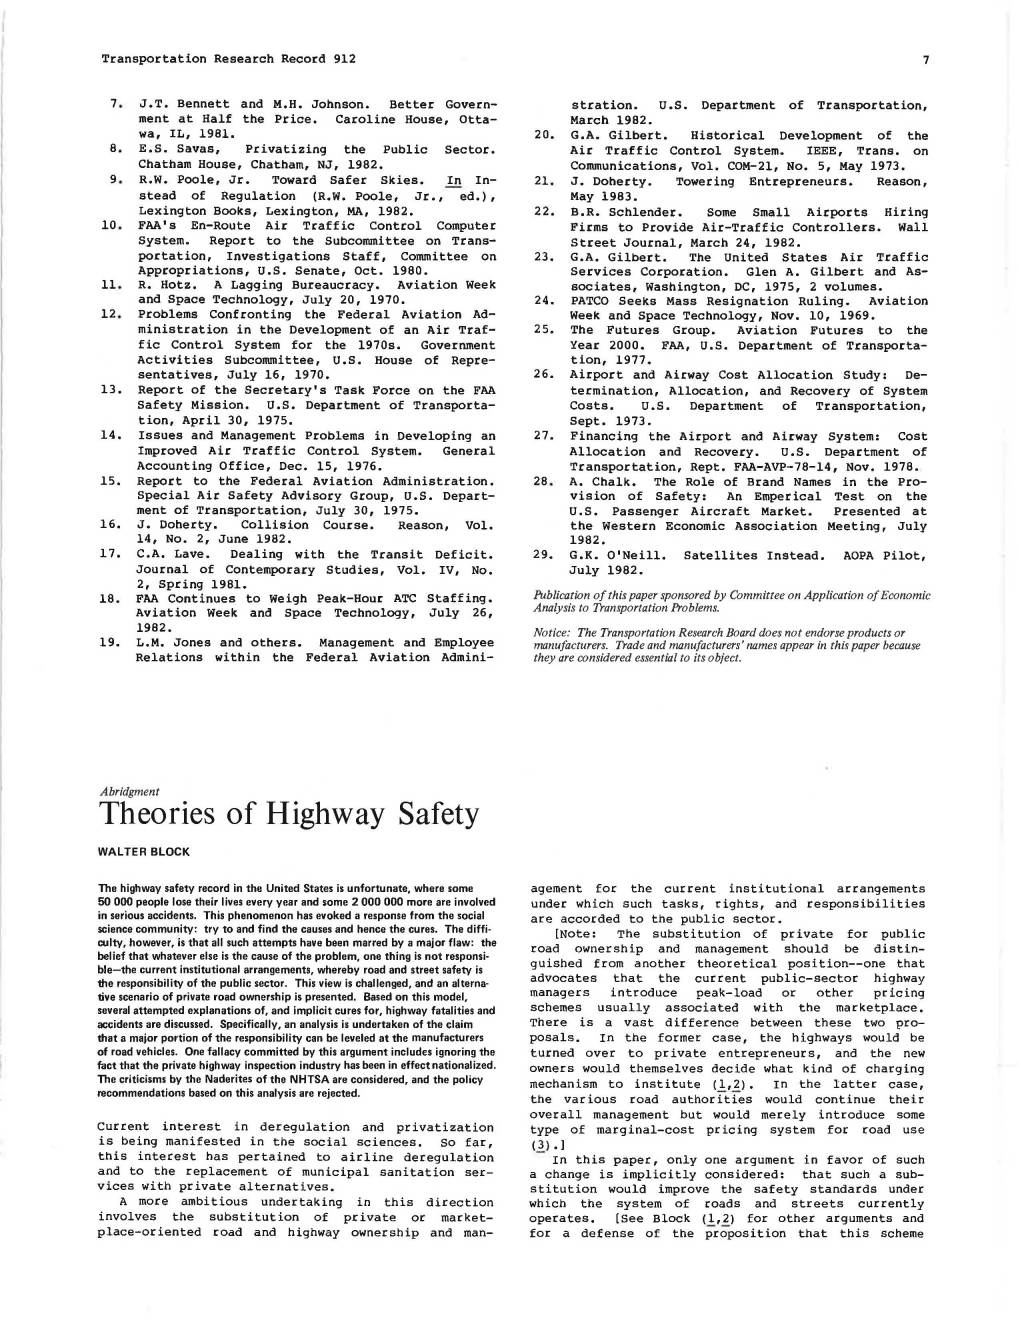 Theories of Highway Safety